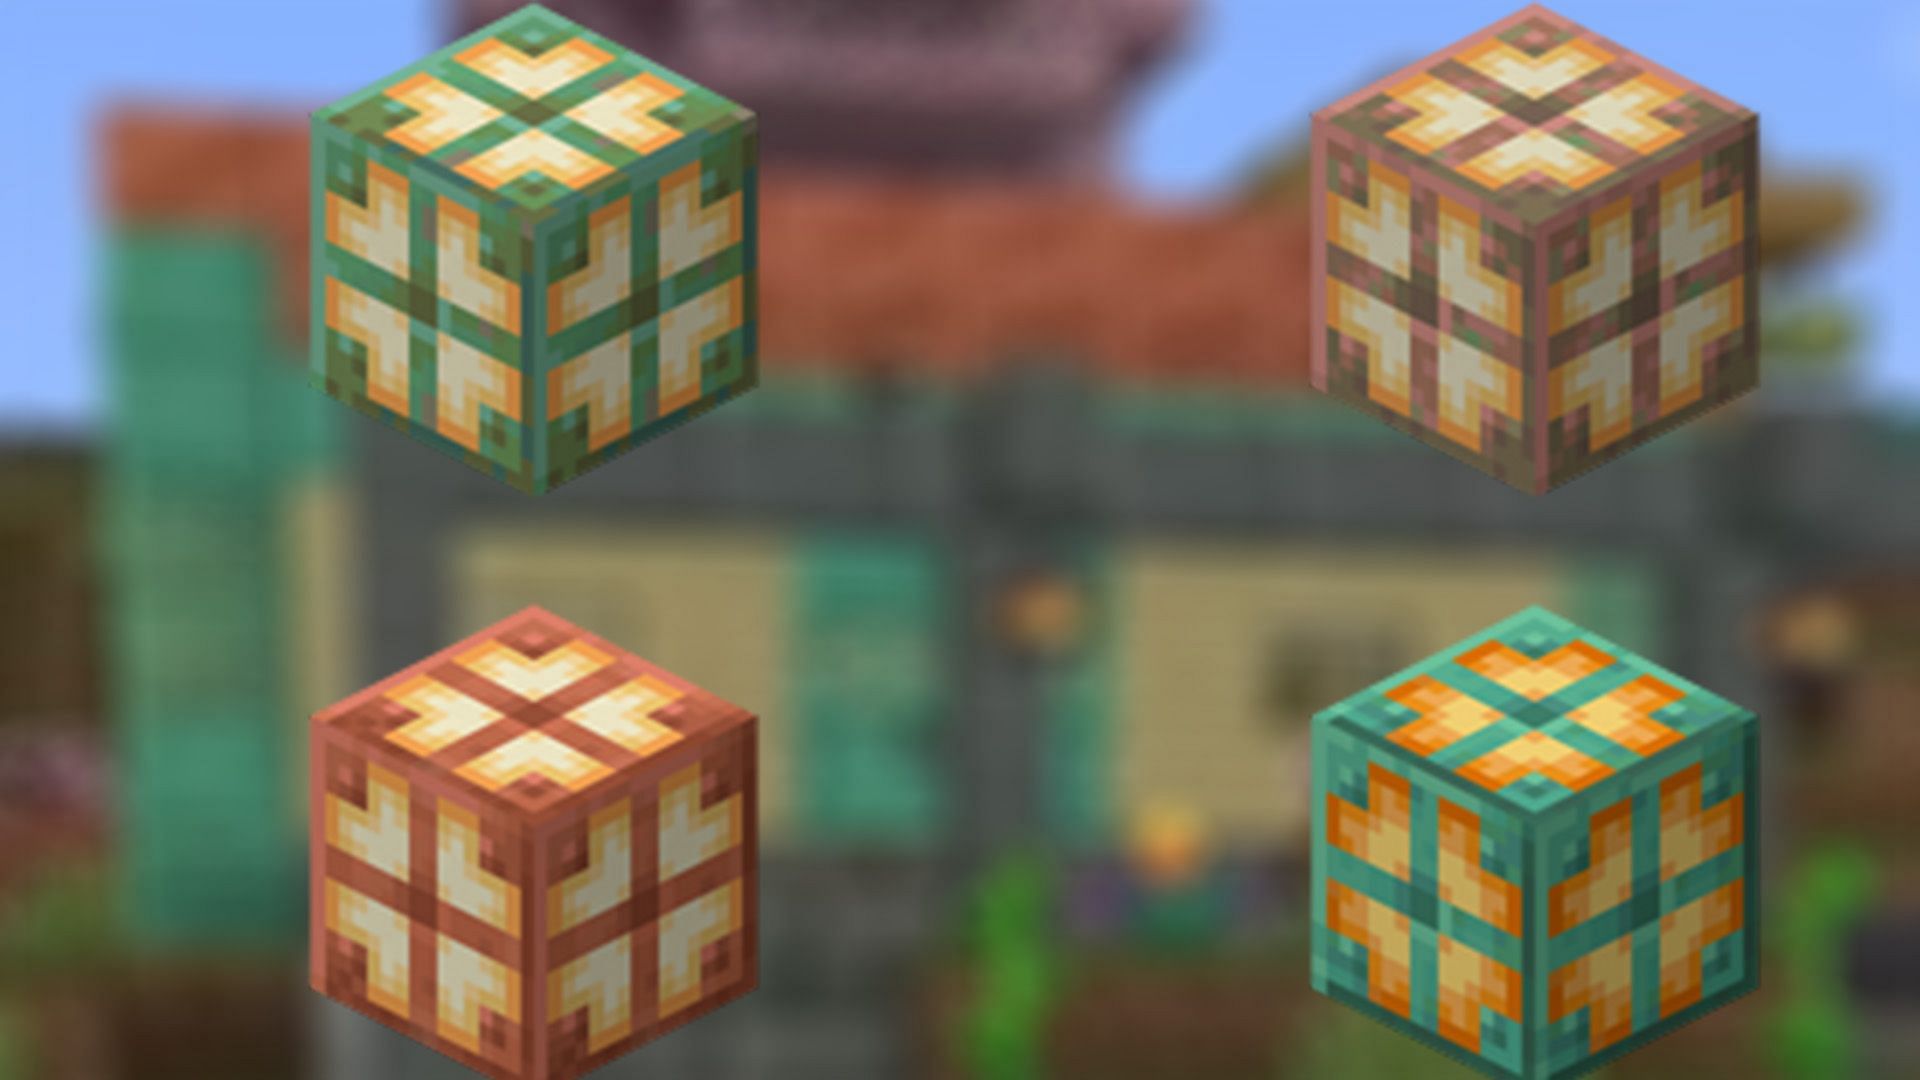 Bulbs that change color as they oxidize (Image via minecraft.wiki)